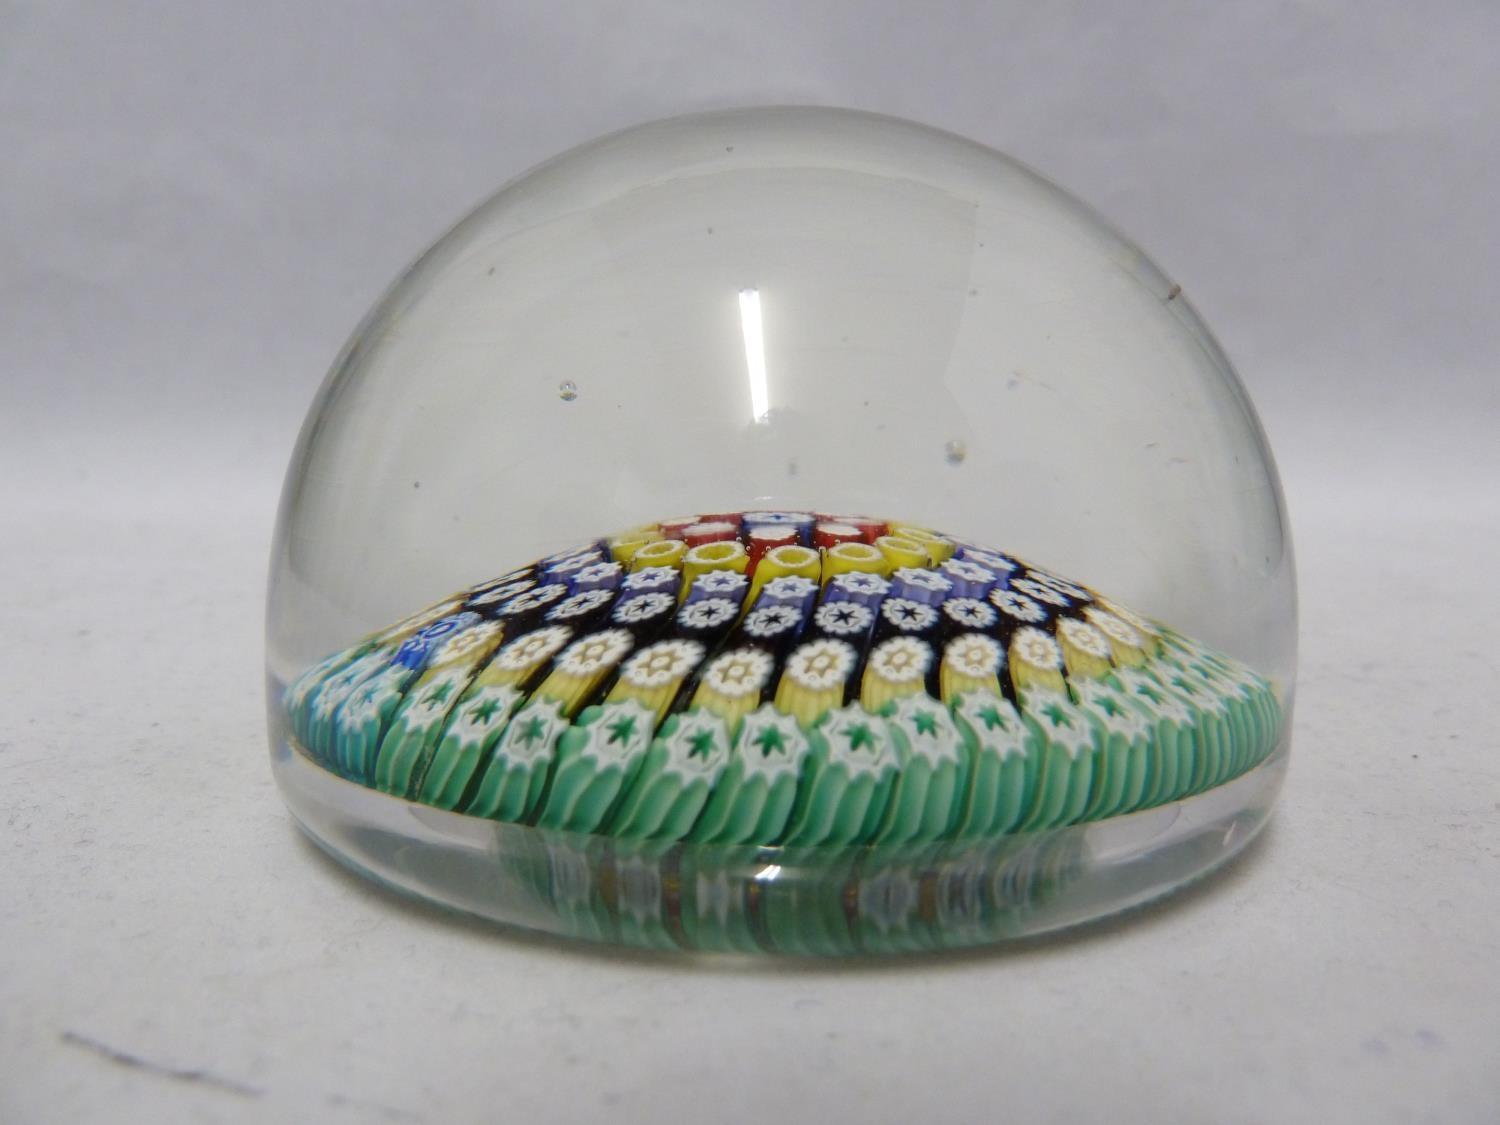 Whitefriars - a glass paperweight, concentric millifiori, canes, date cane for 1977 - Image 3 of 4